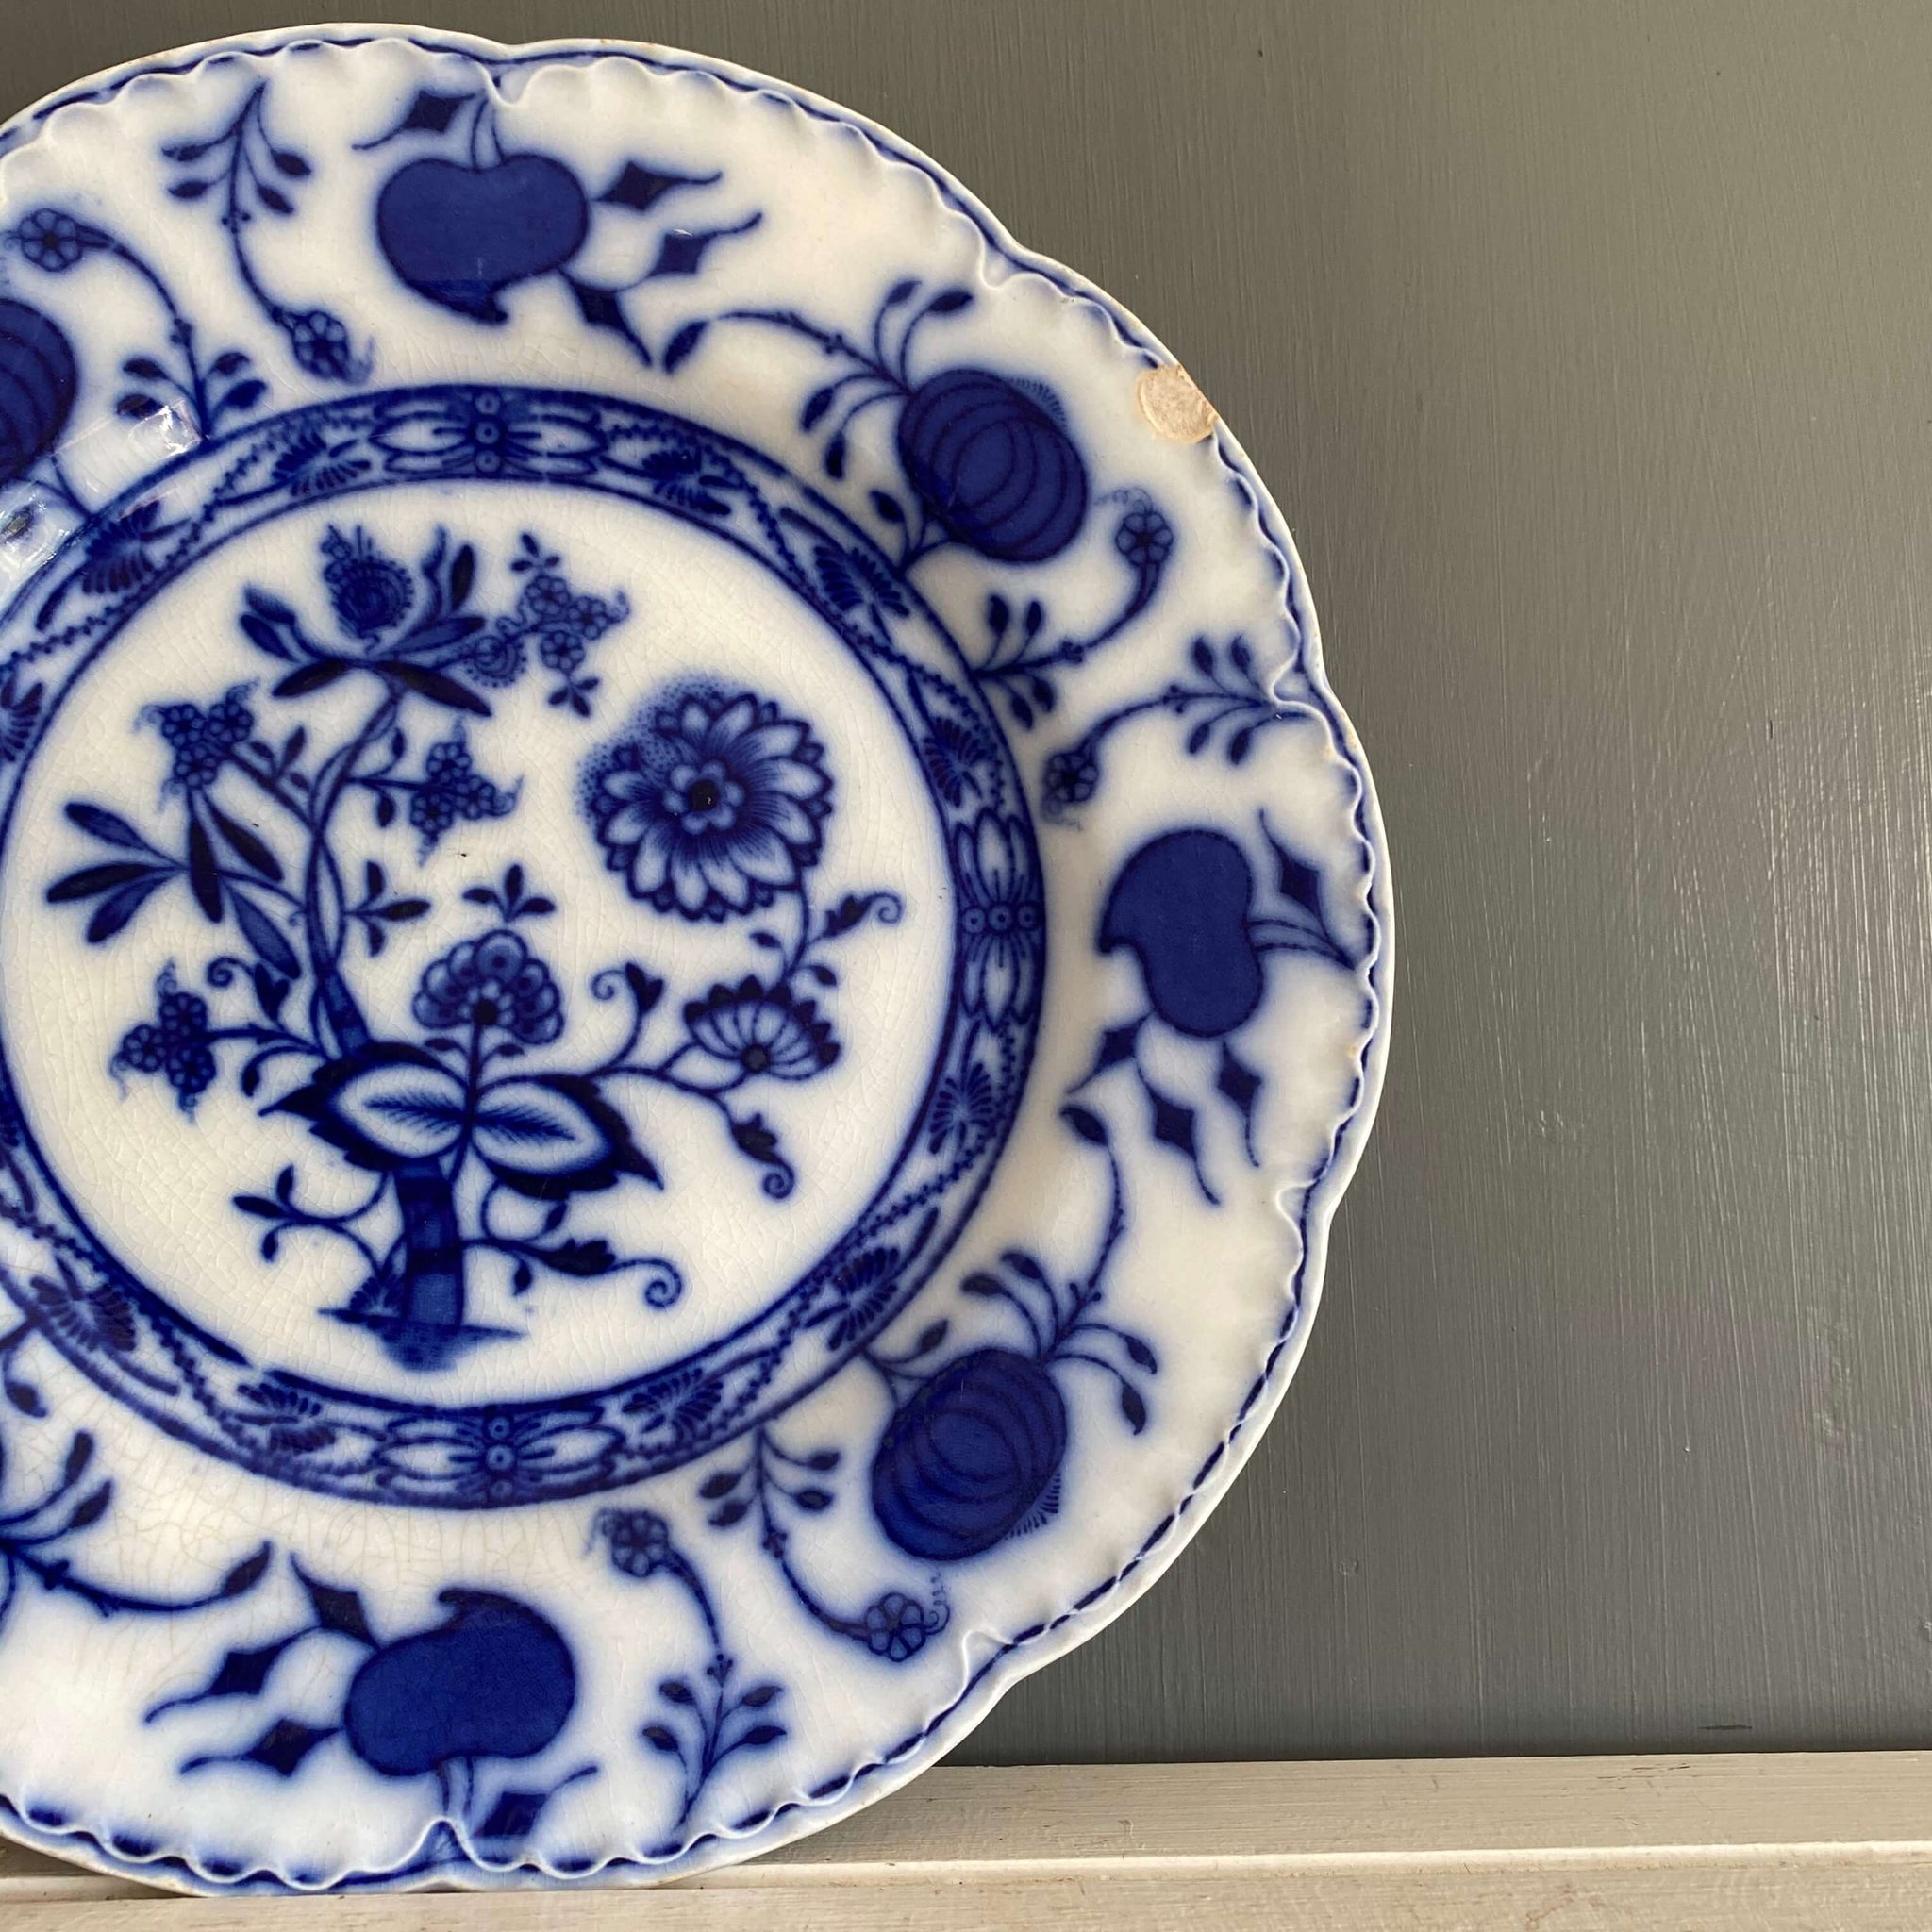 Antique Flow Blue Luncheon Plate - Johnson Brothers England - Holland Pattern circa 1900-1915